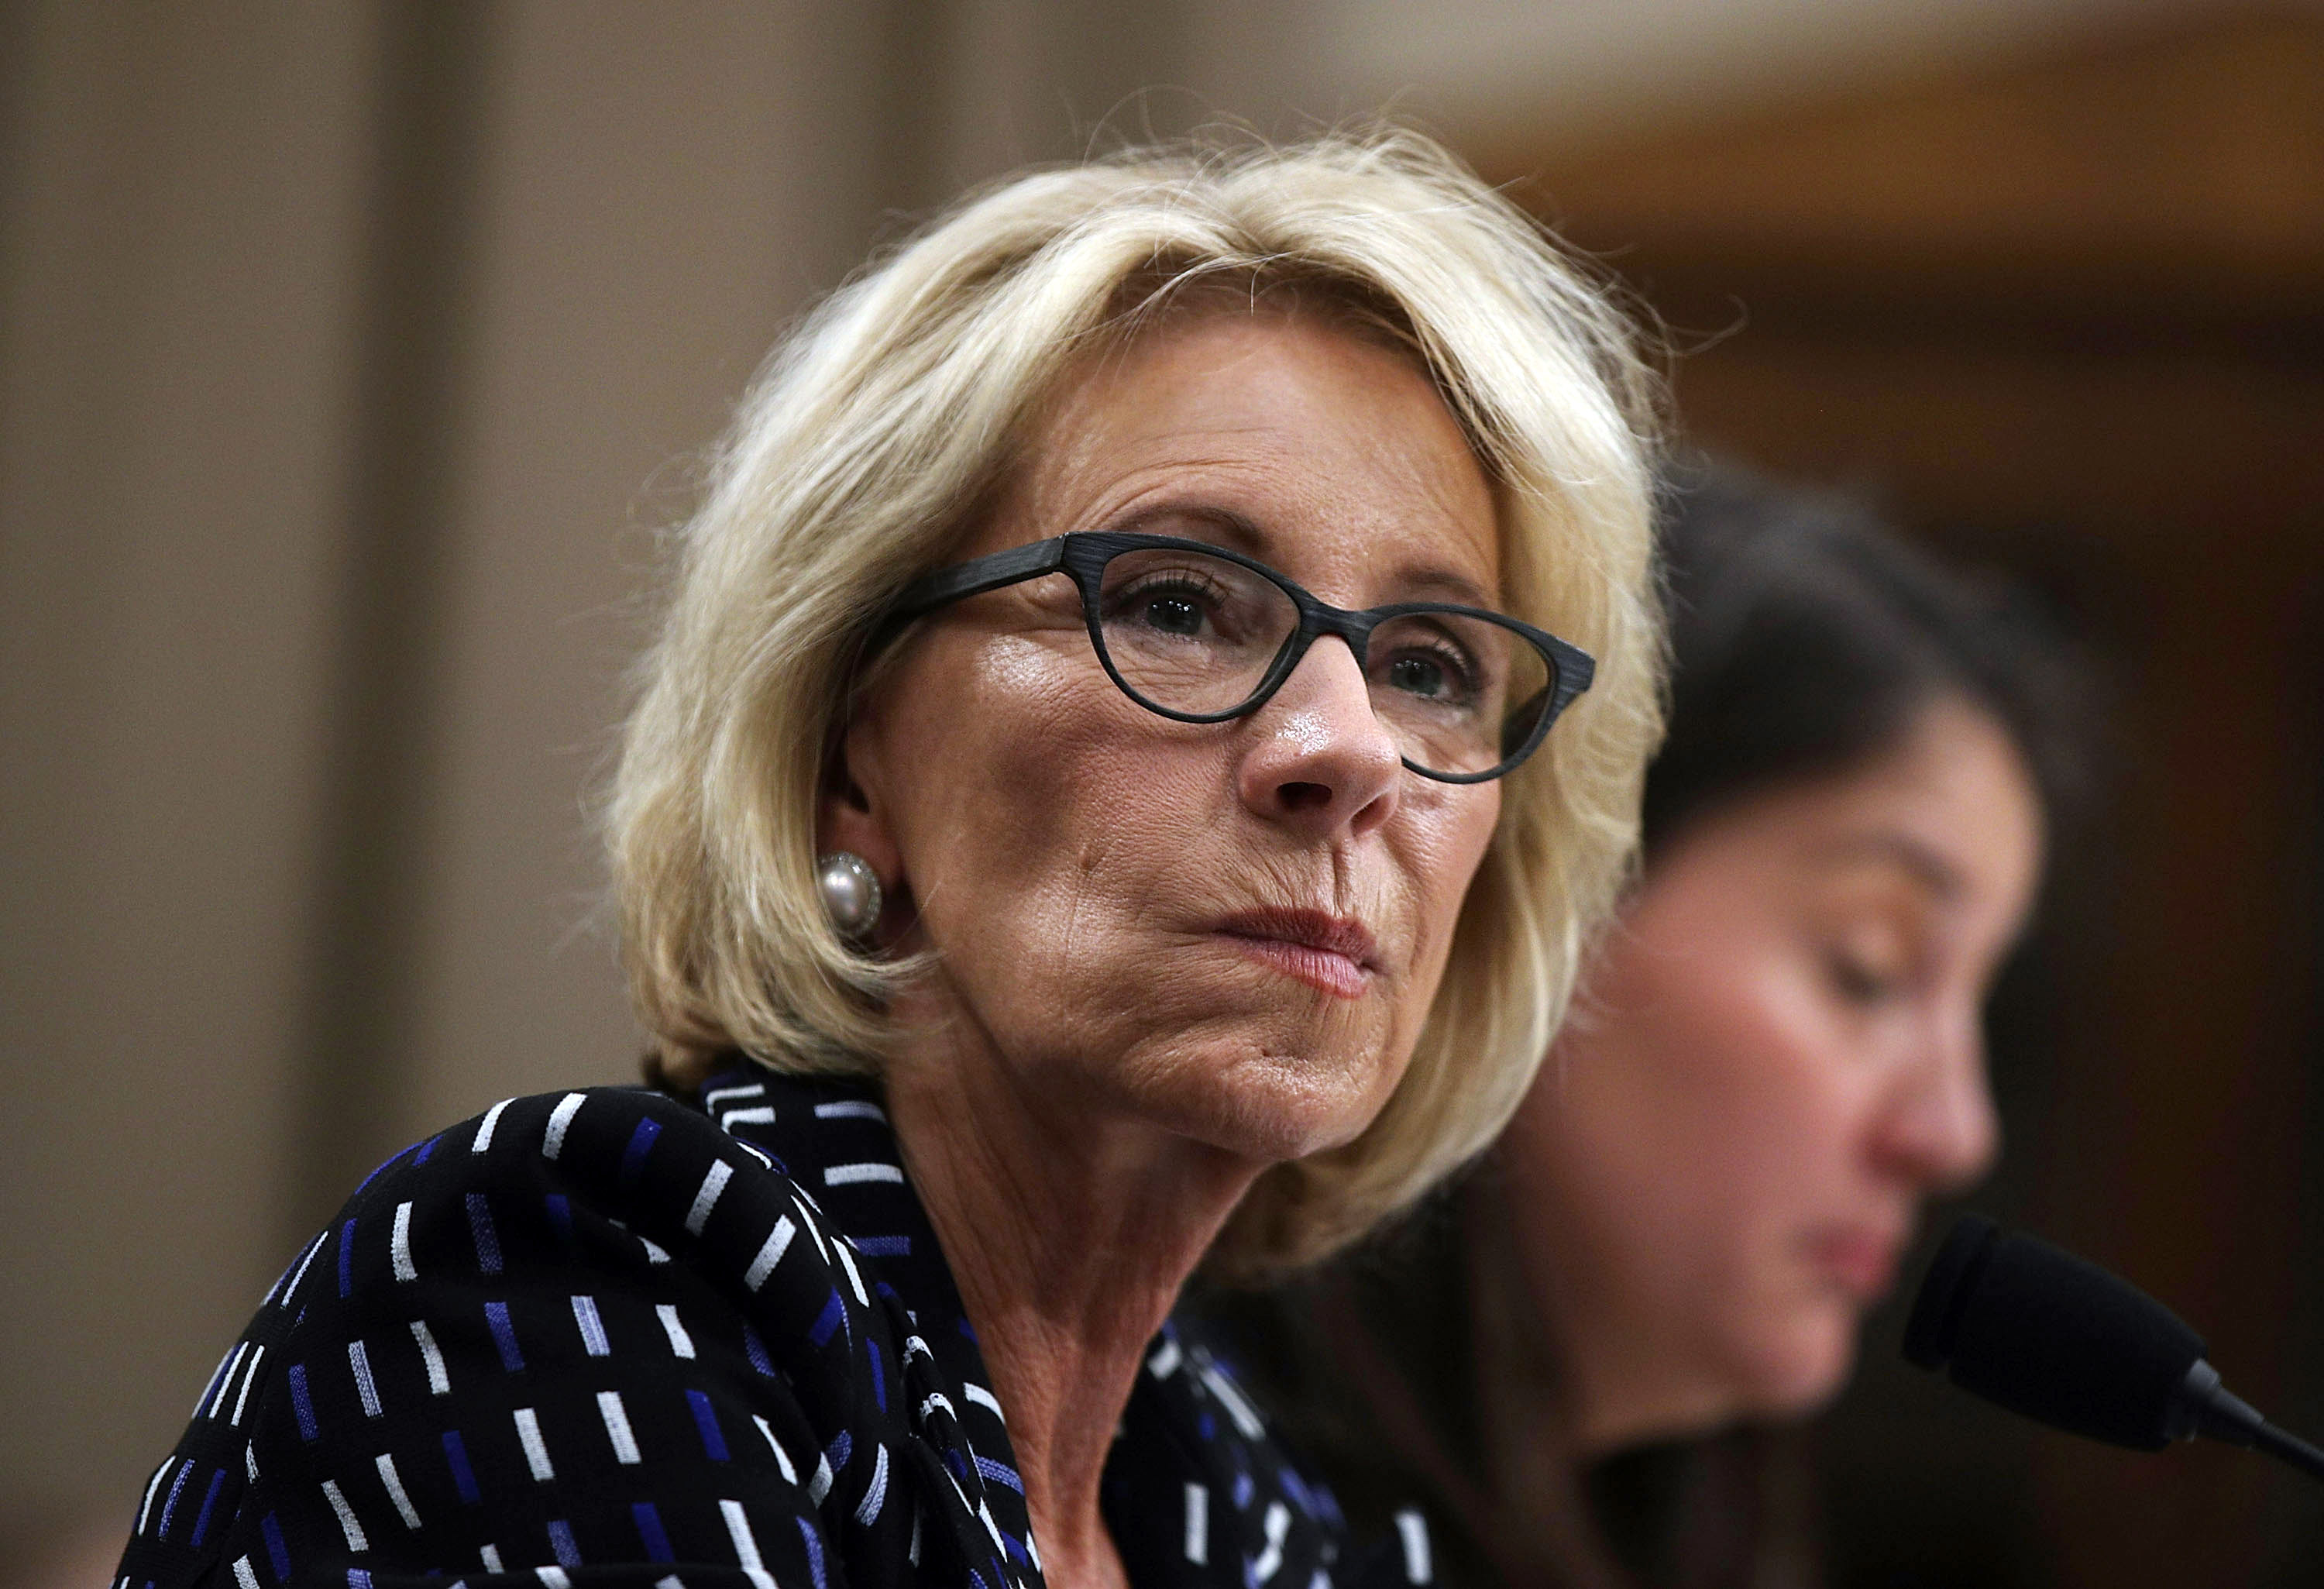 Secretary of Education Betsy DeVos testifies during a hearing before the Labor, Health and Human Services, Education and Related Agencies Subcommittee of the House Appropriations Committee on May 24, 2017 on Capitol Hill in Washington, D.C. (Alex Wong/Getty Images)